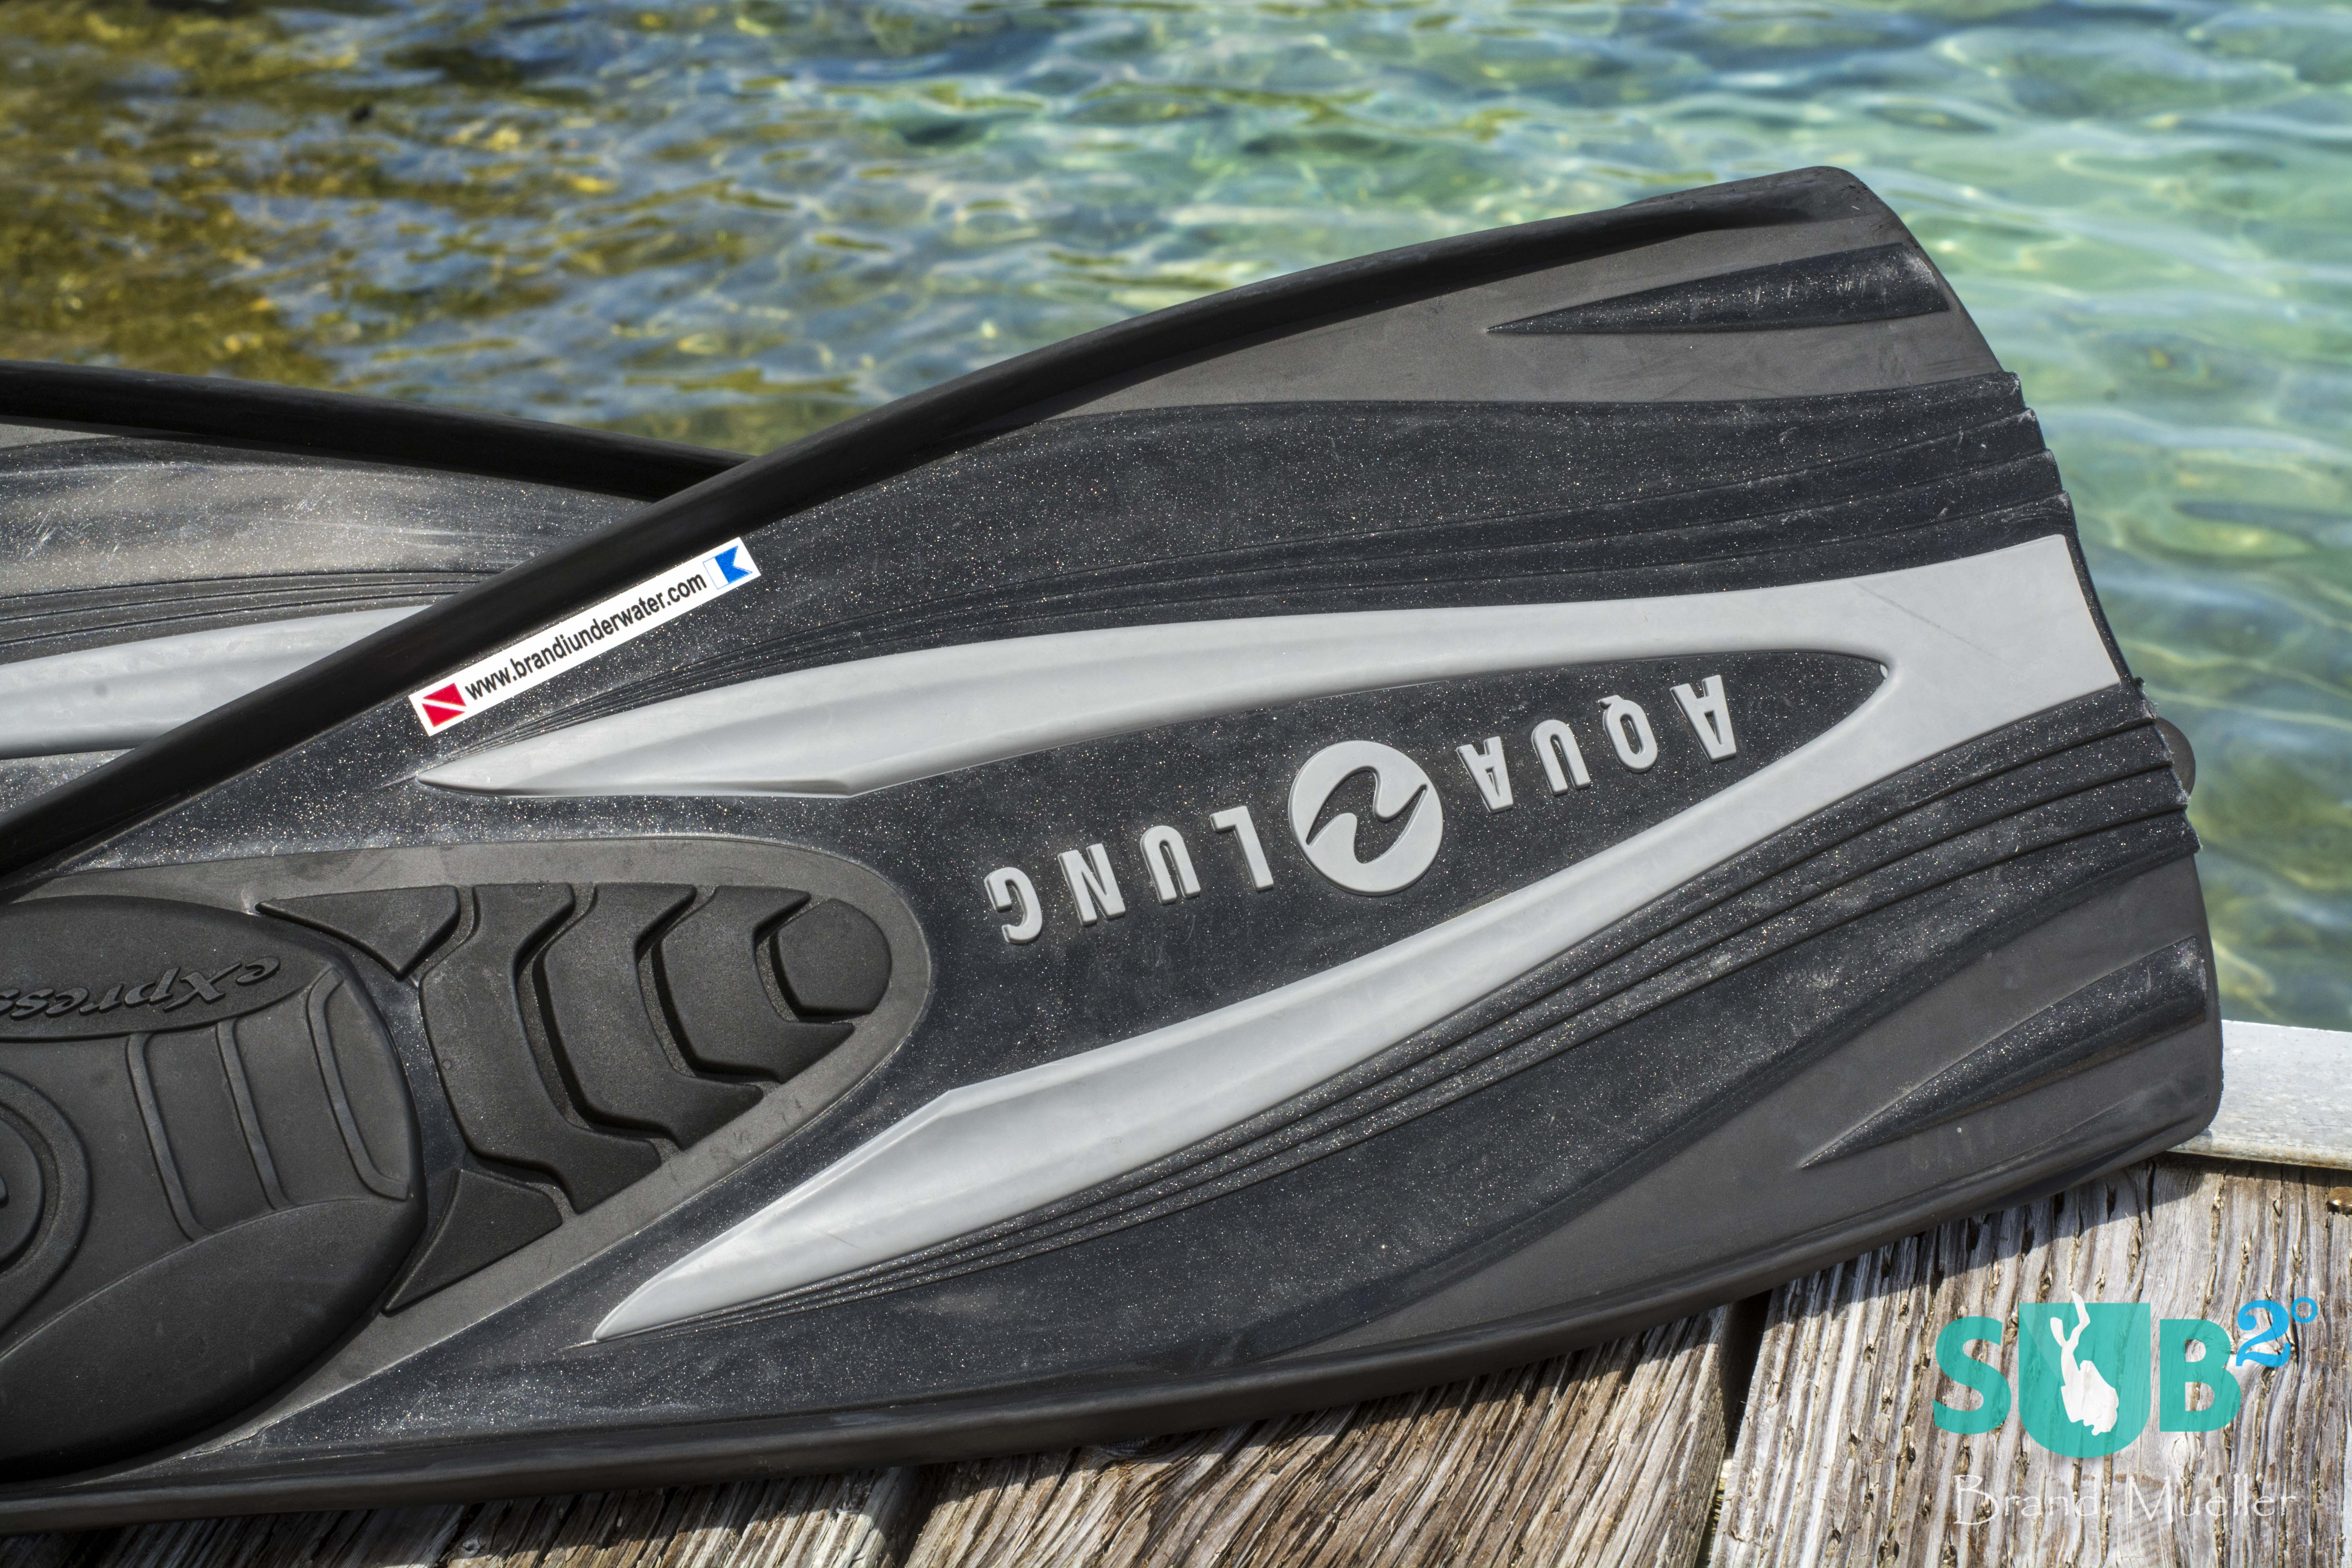 Lots of divers may have the same fins on a busy dive boat.  A simple waterproof sticker with your name on it can help keep you find your own fins in a pile of many.